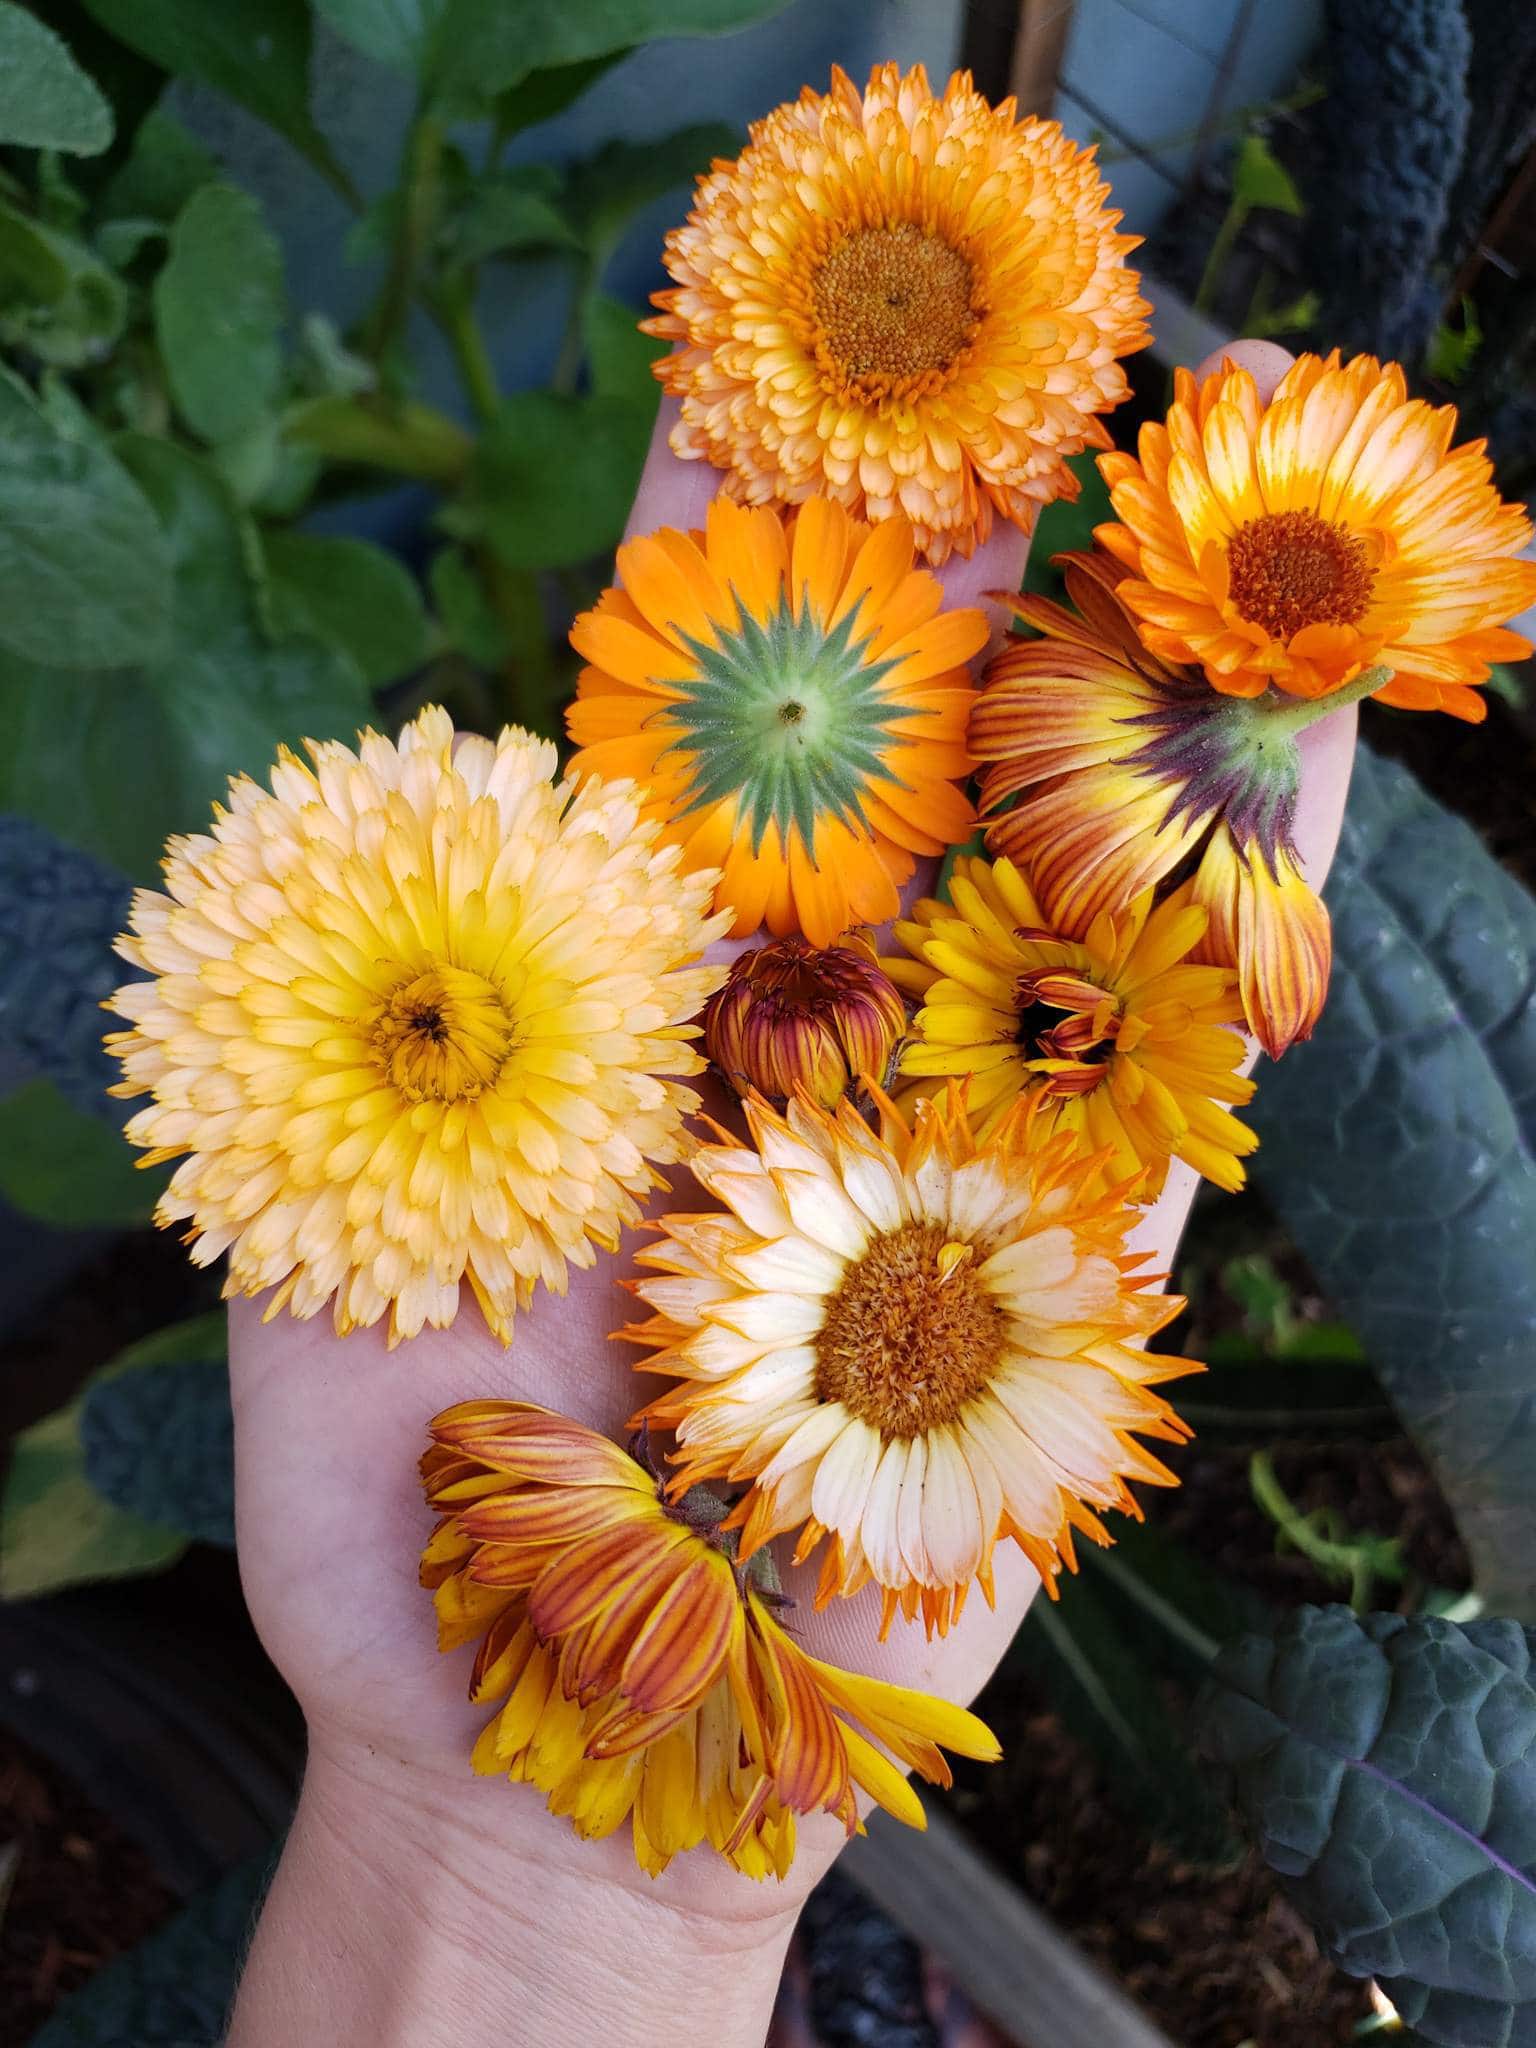 A close up of a hand holding about 8 calendula blooms of various sizes, petal structure and color. Some are bright orange, some are more light yellow, and some with pink tones. The hand is covering over a garden bed of kale and lettuce.